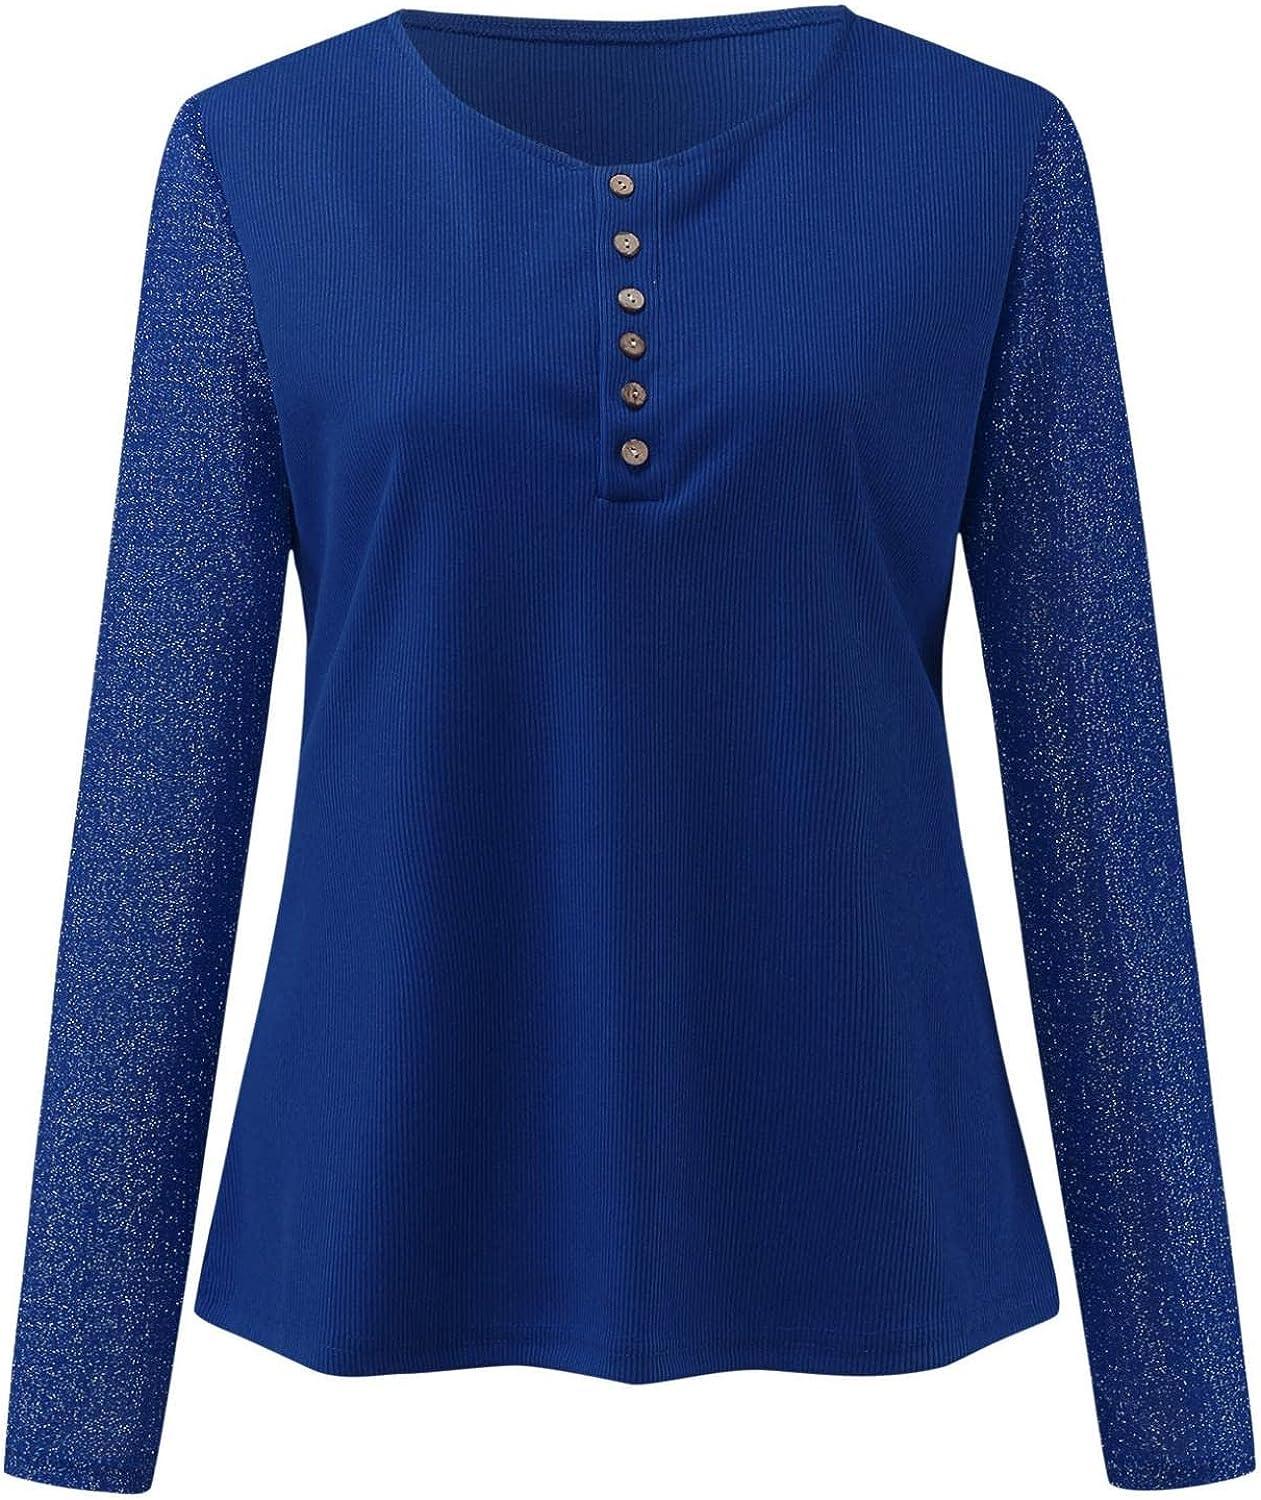 Long Sleeve Shirts for Women Fitted, Women's Long Sleeve Tops Lace V Neck  Button Down Henley Shirts Ribbed Knit Blouse Tunics XX-Large Blue